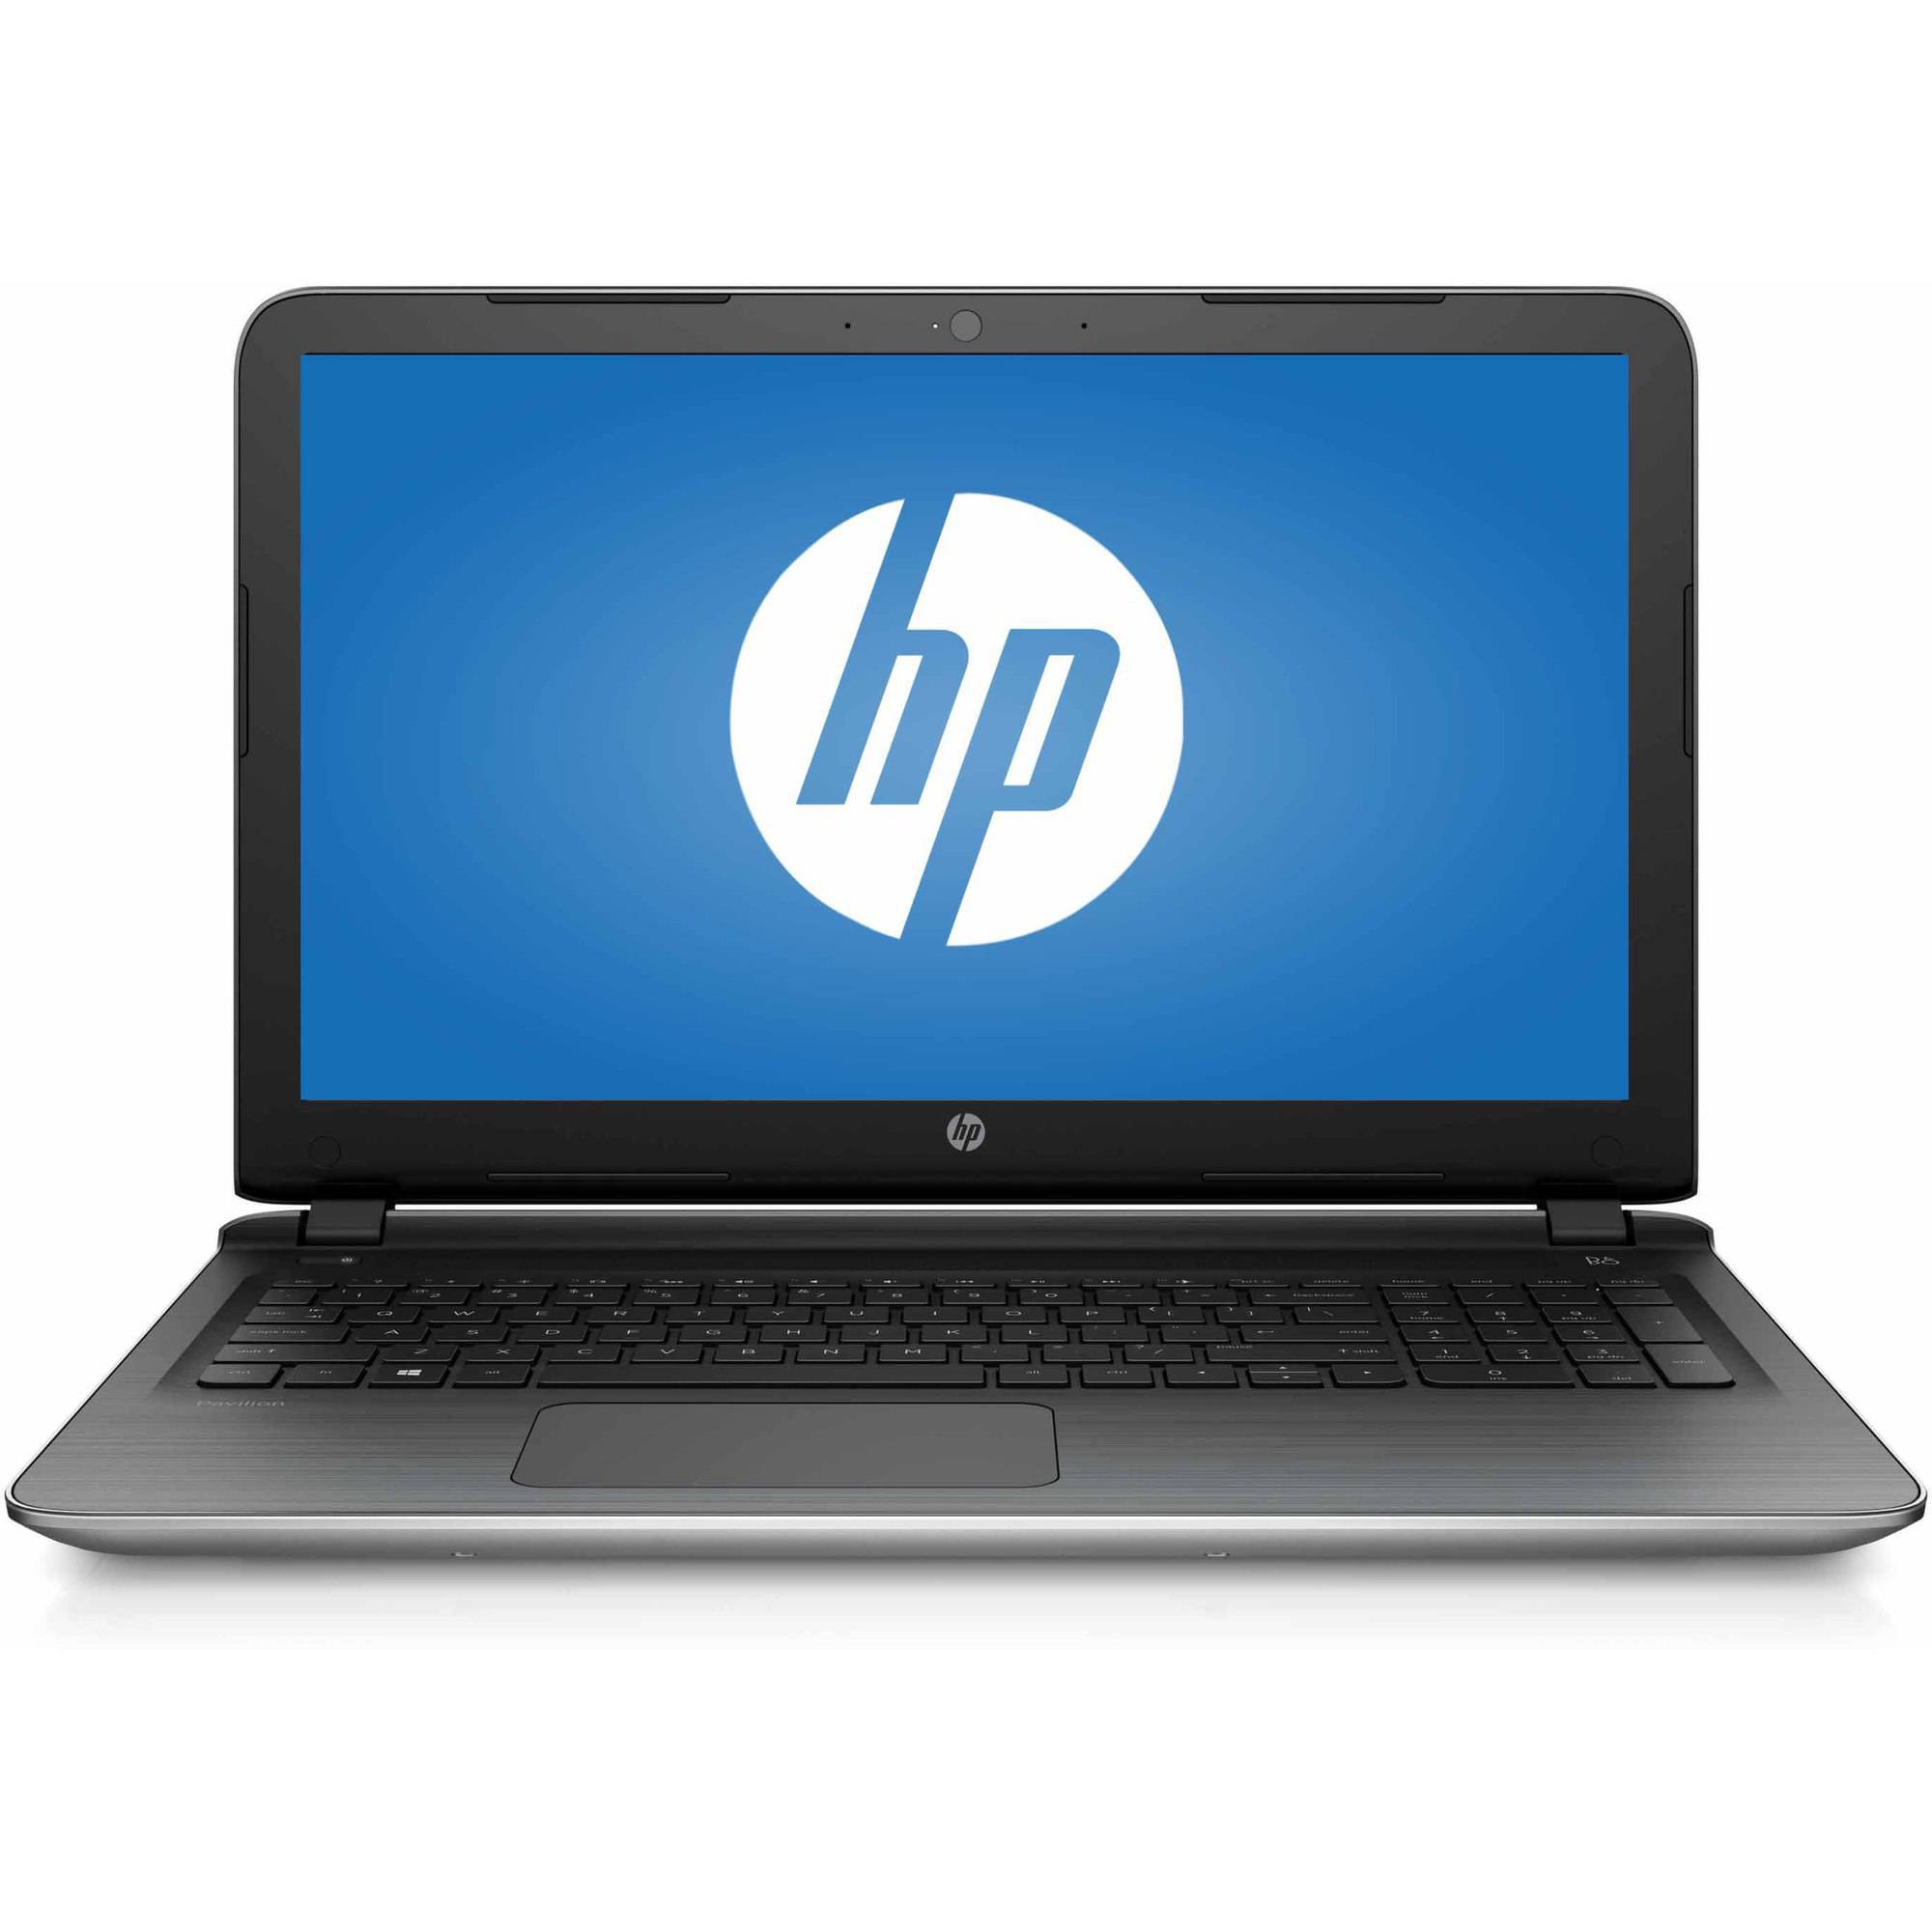 Restored HP Silver 17.3" Pavilion 17-g121wm Laptop PC with AMD A10-8700P Processor, 8GB Memory, 1TB Hard Drive and Windows 10 Home (Refurbished) - image 1 of 3